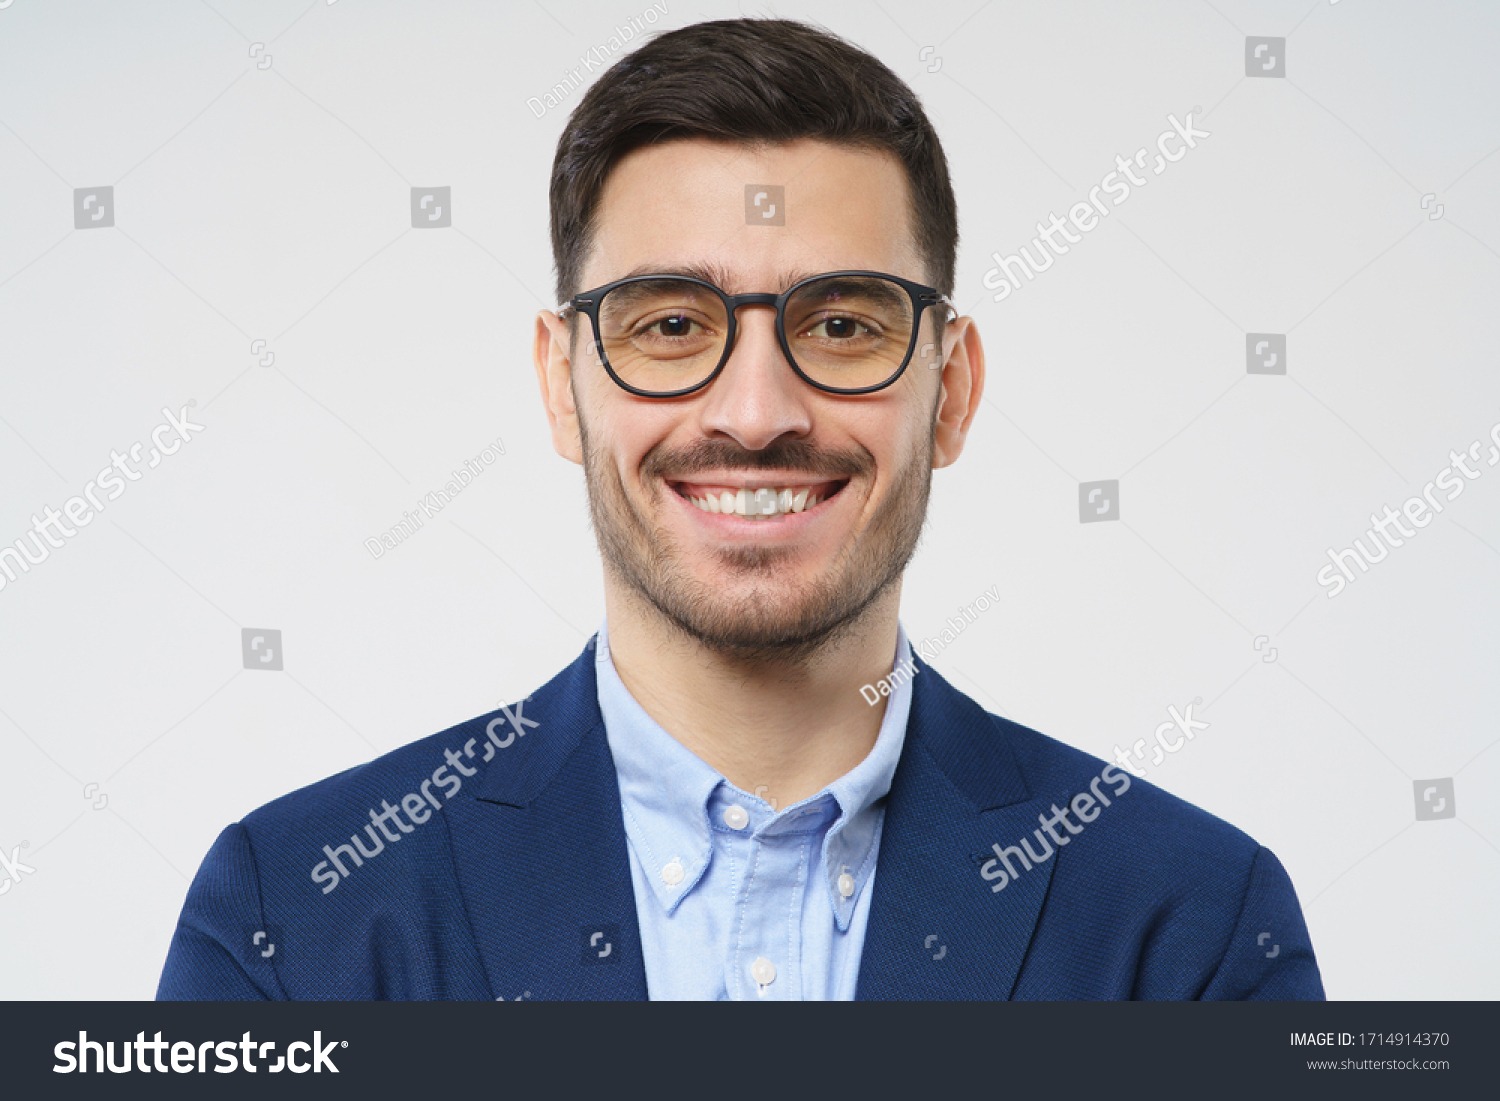 Close-up headshot of young businessman wearing glasses and smart casual suit, smiling at camera, isolated on gray background #1714914370